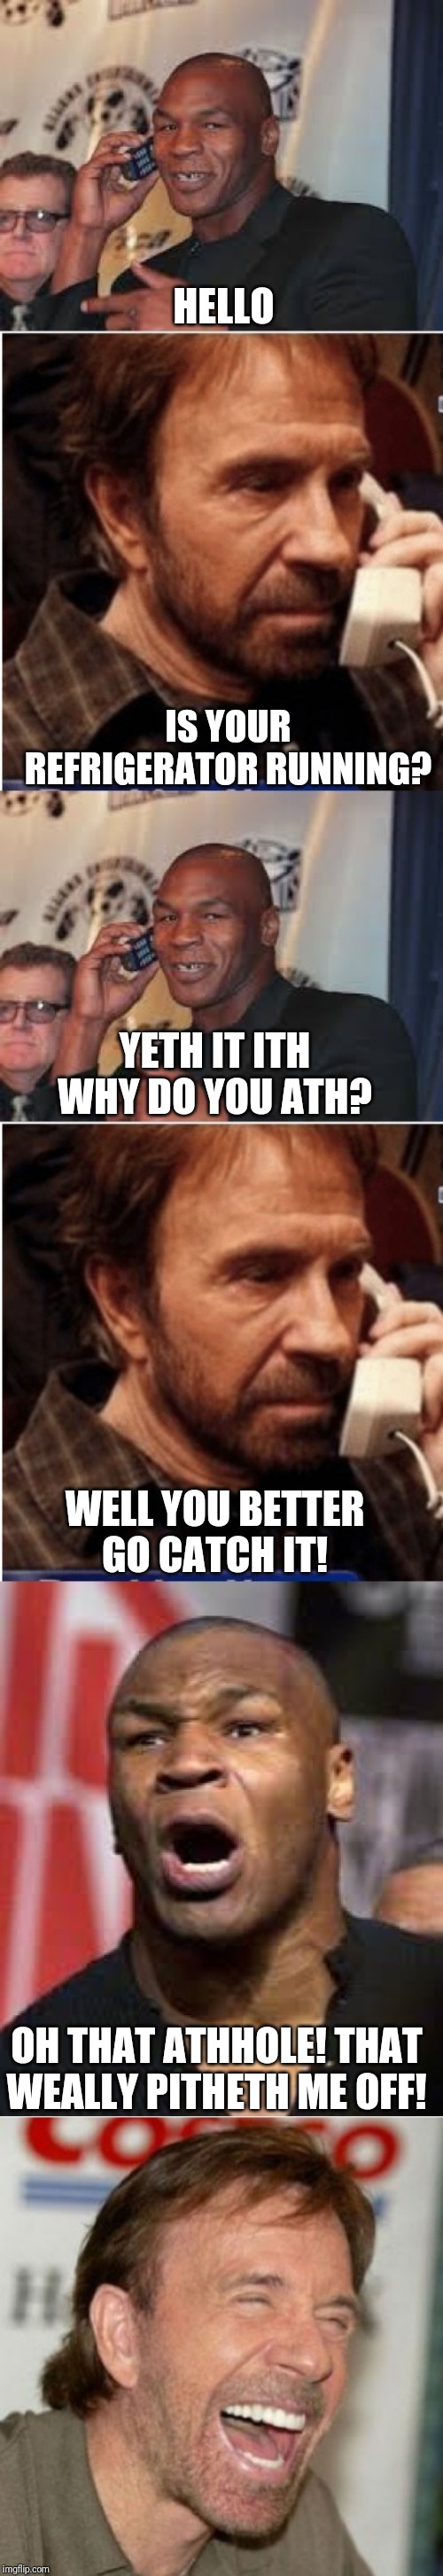 Chuck having a little fun wit da champ | HELLO; IS YOUR REFRIGERATOR RUNNING? YETH IT ITH WHY DO YOU ATH? WELL YOU BETTER GO CATCH IT! OH THAT ATHHOLE! THAT WEALLY PITHETH ME OFF! | image tagged in chuck norris prank call,chuck pranks mike | made w/ Imgflip meme maker